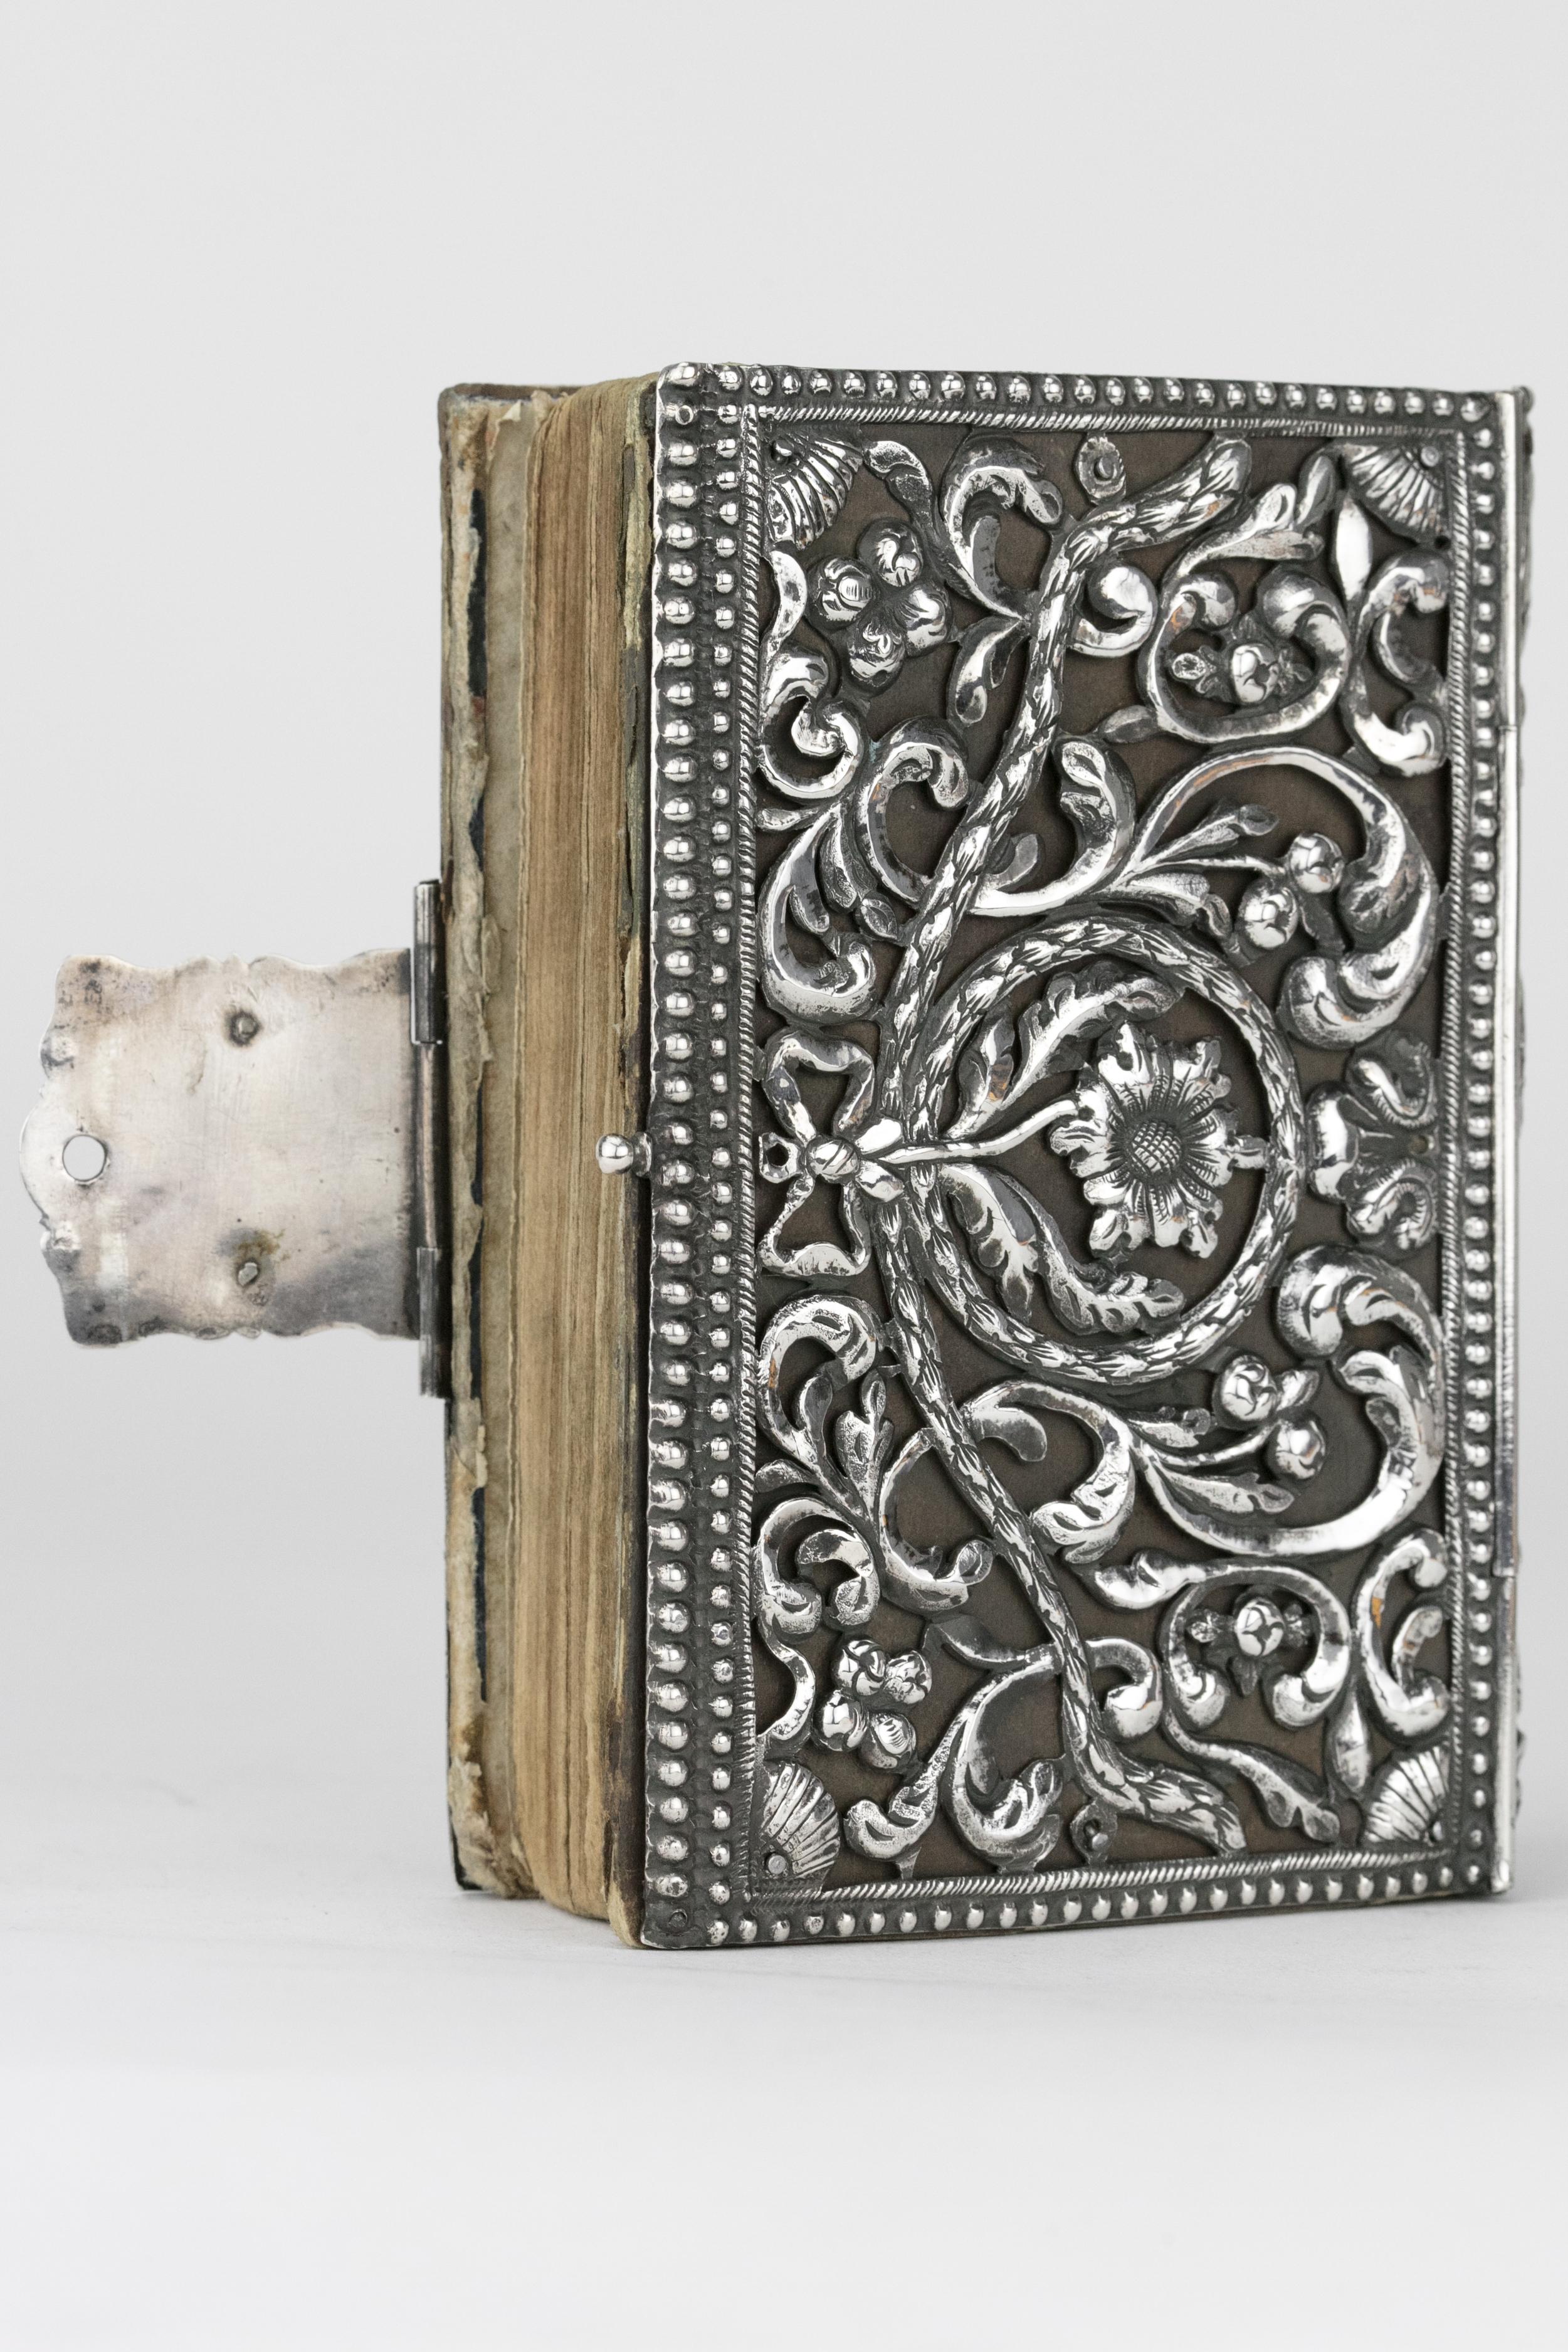 Handmade German silver book binding, circa 1804.
Both covers pierced and chased with foliate scrollwork with ribboned flower, spine chased to match, fitted with the Hebrew Bible, Sulzbach, 1804.

Every item in Menorah Galleries is accompanied by a